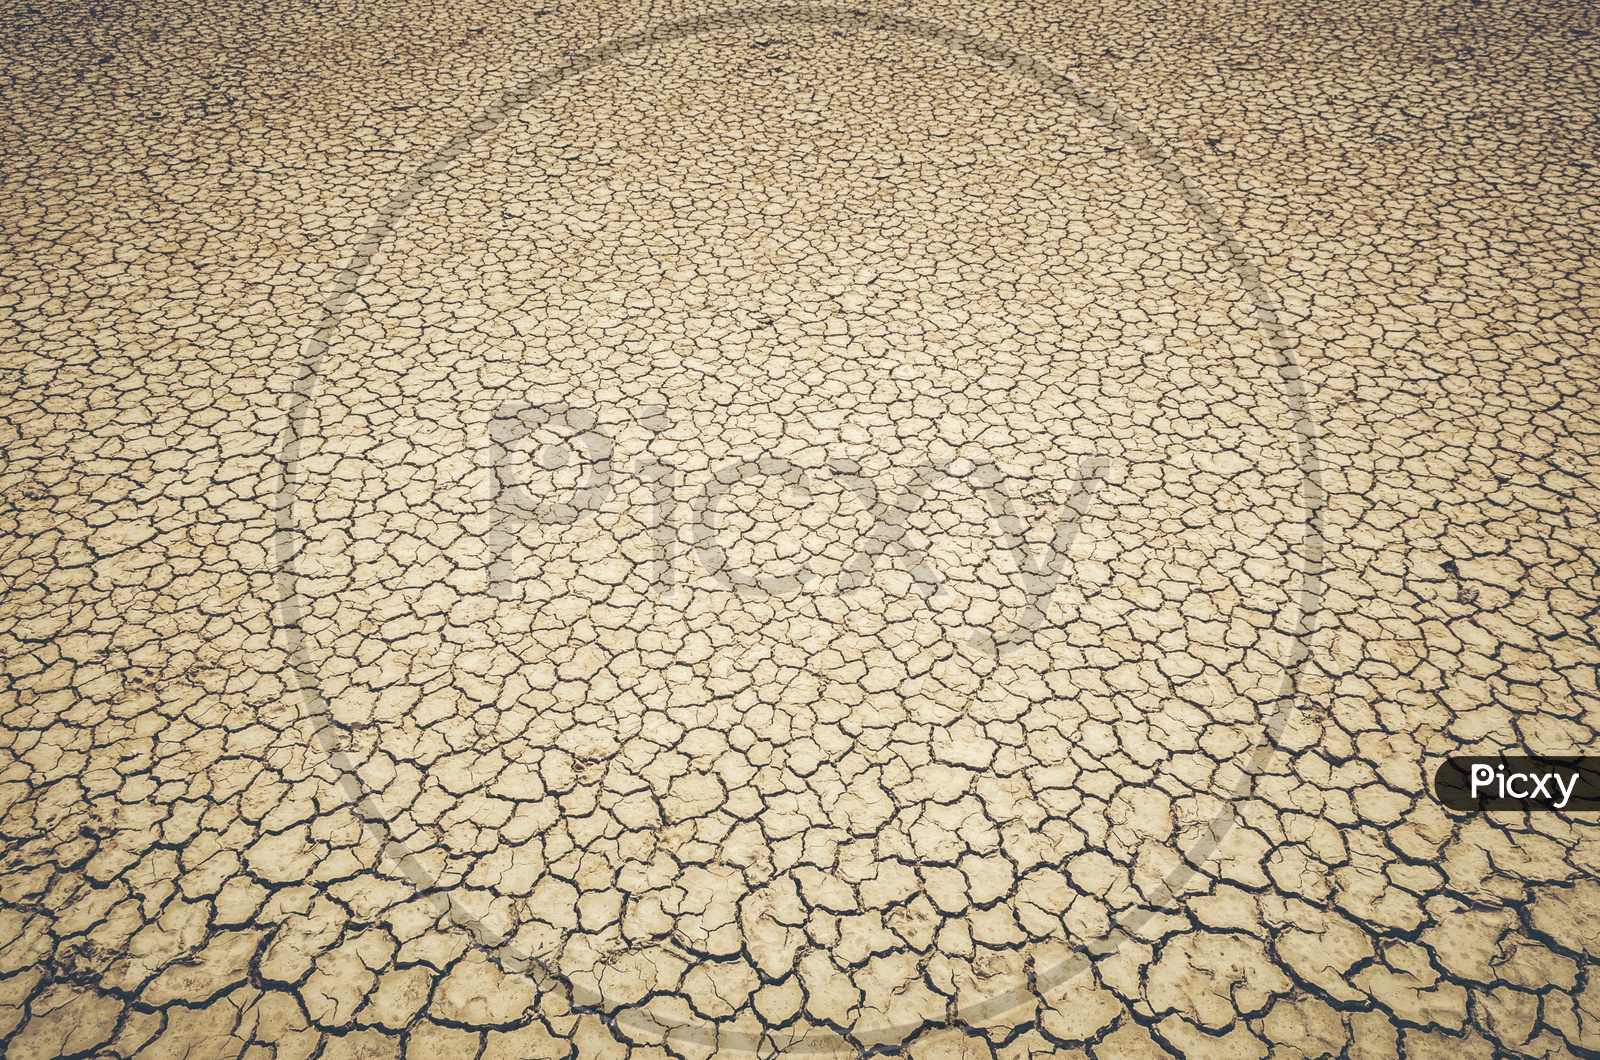 Drought Land With Dry Cracked Soil Texture